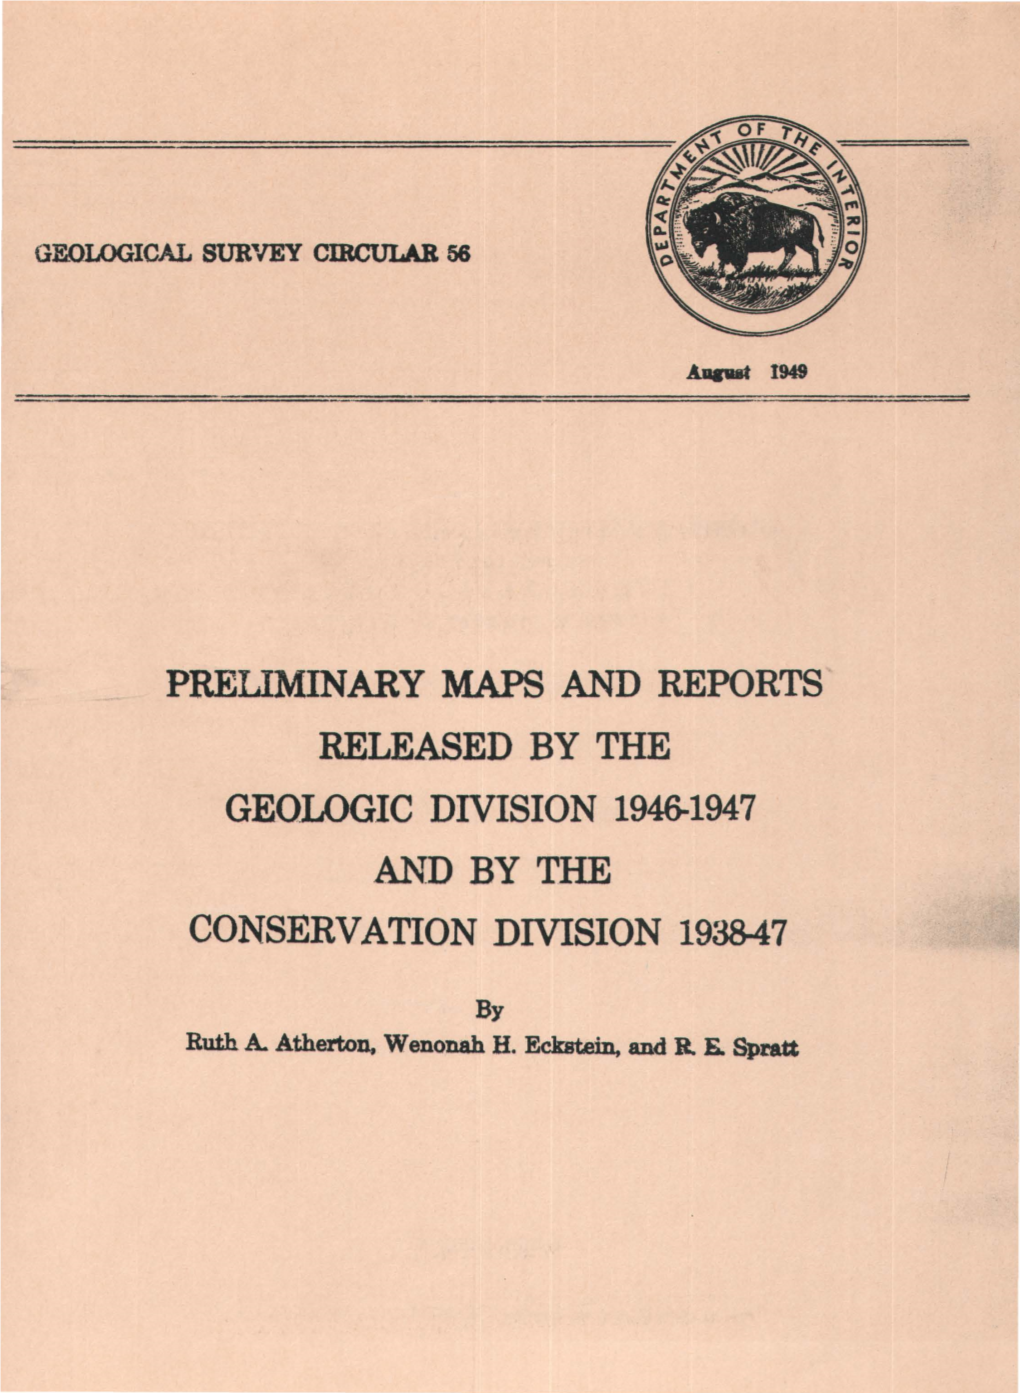 Preliminary Maps and Reports Released by the Geologic Division 1946-1947 and by the Conservation Division 1938-47